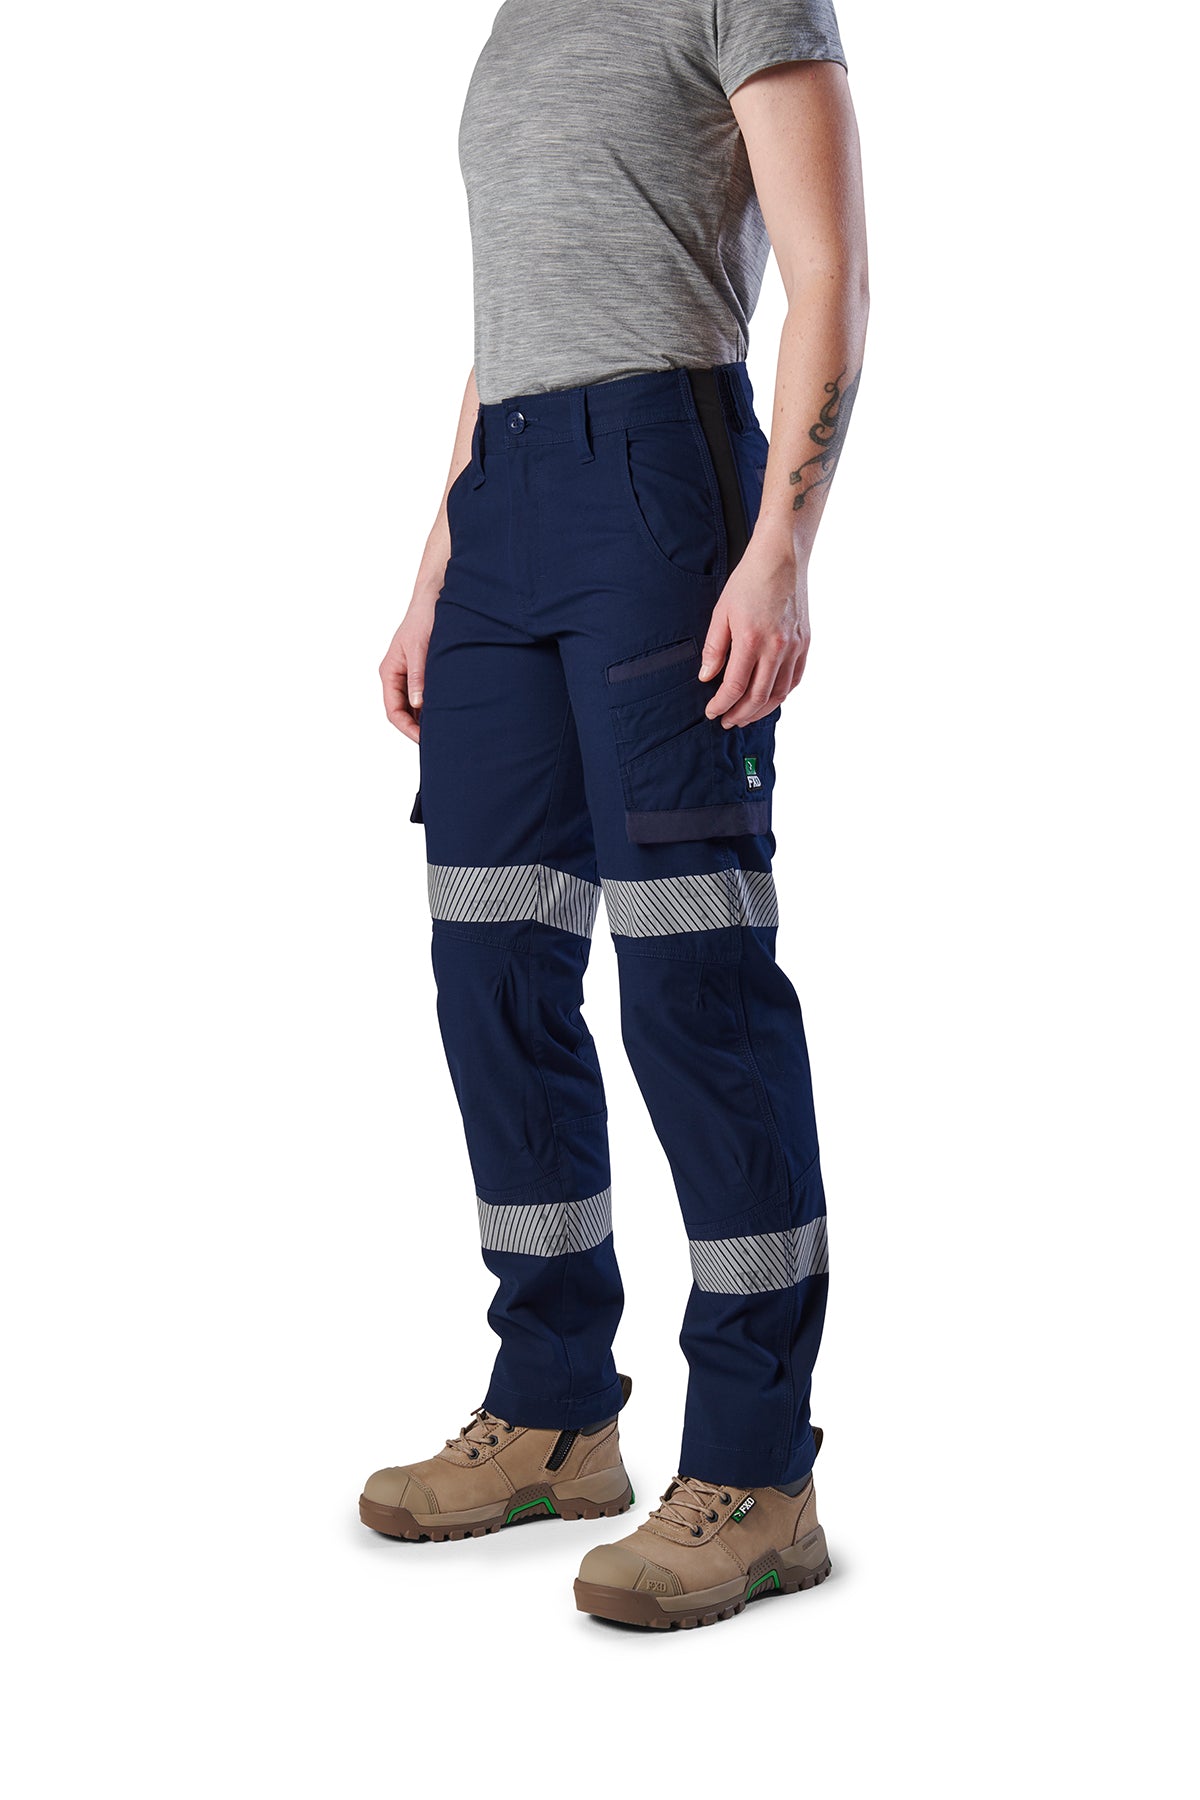 FXD WP-7WT Women's Taped Stretch Ripstop Work Pant